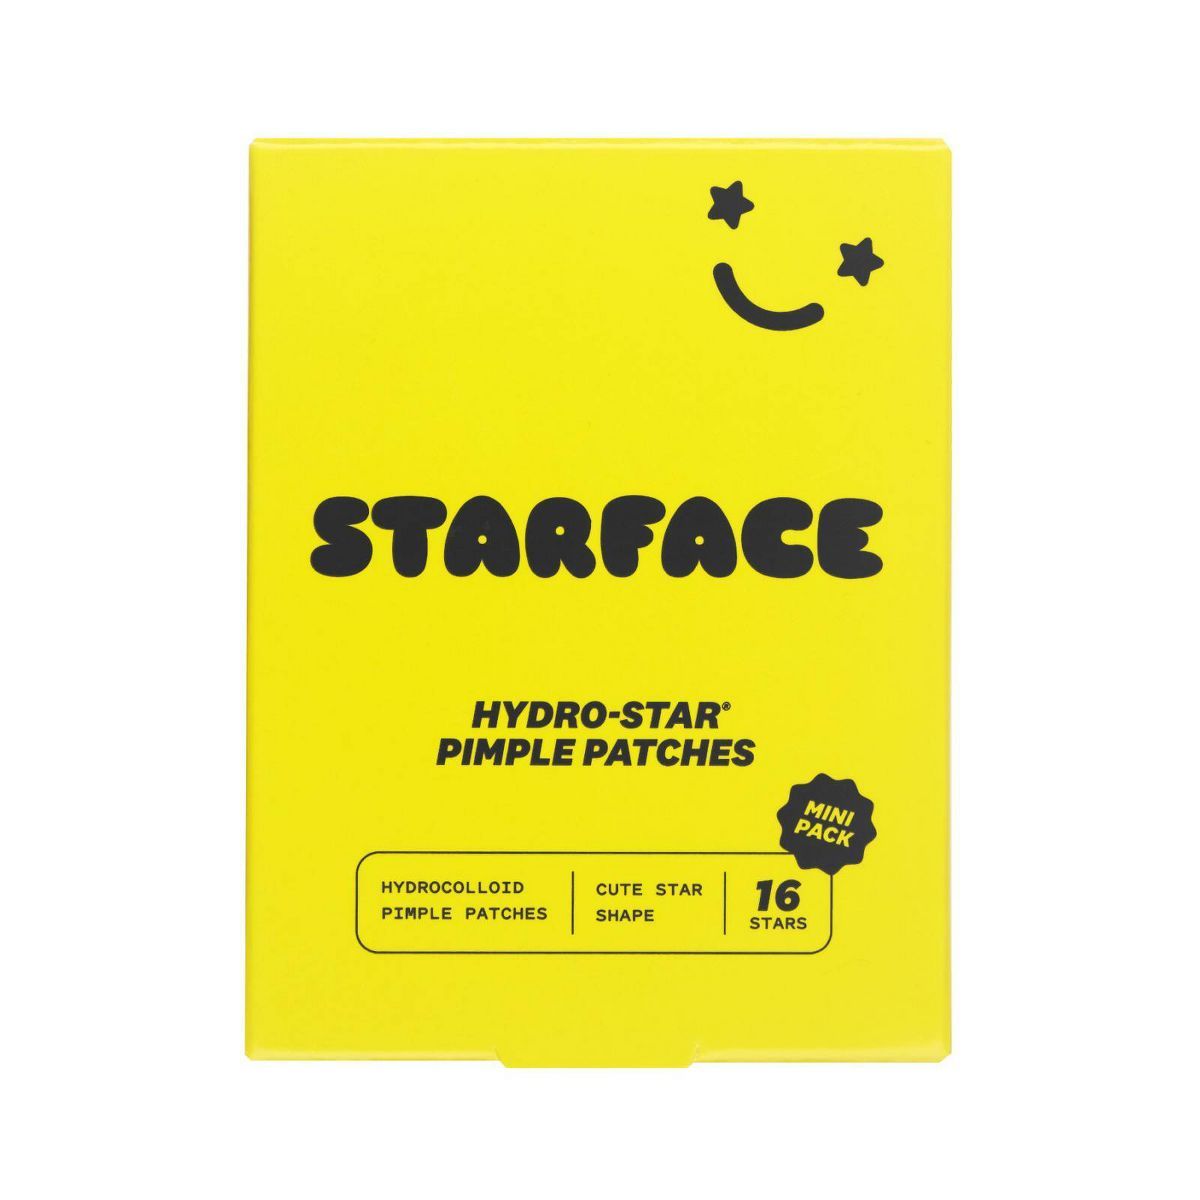 Starface Hydro Star Pimple Patches Mini Pack - 16pc | Target